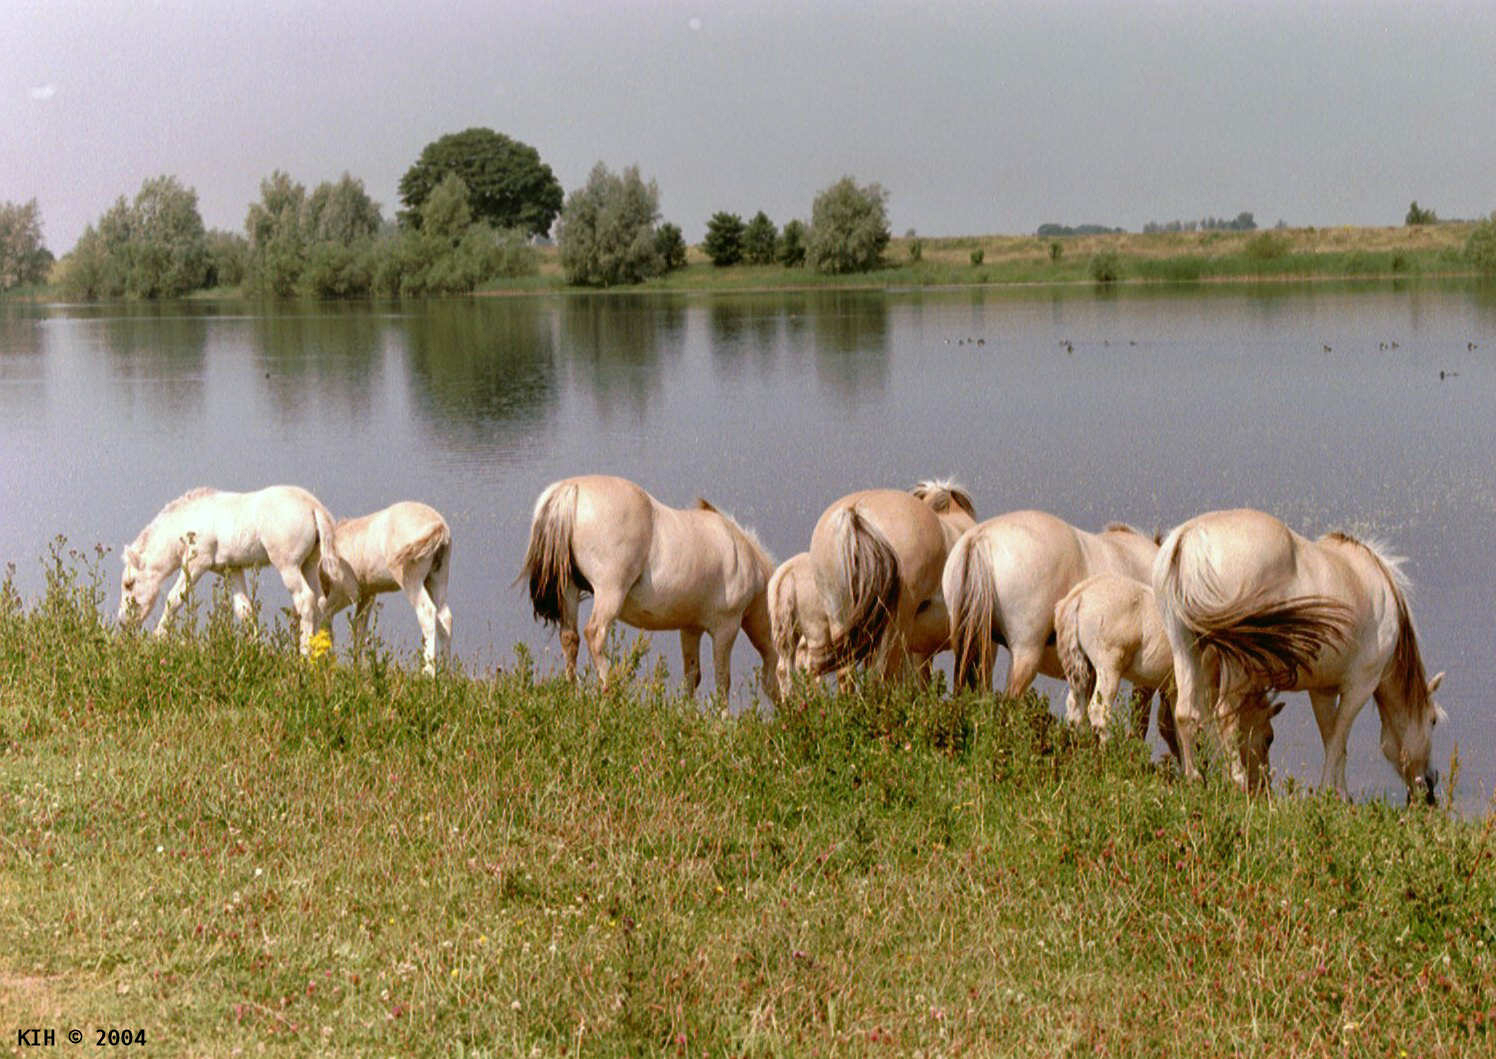 ImgX%2FRGES%2FFotosRGES%2FHorses drinking from lake %5BNL 2001%5D   KIH